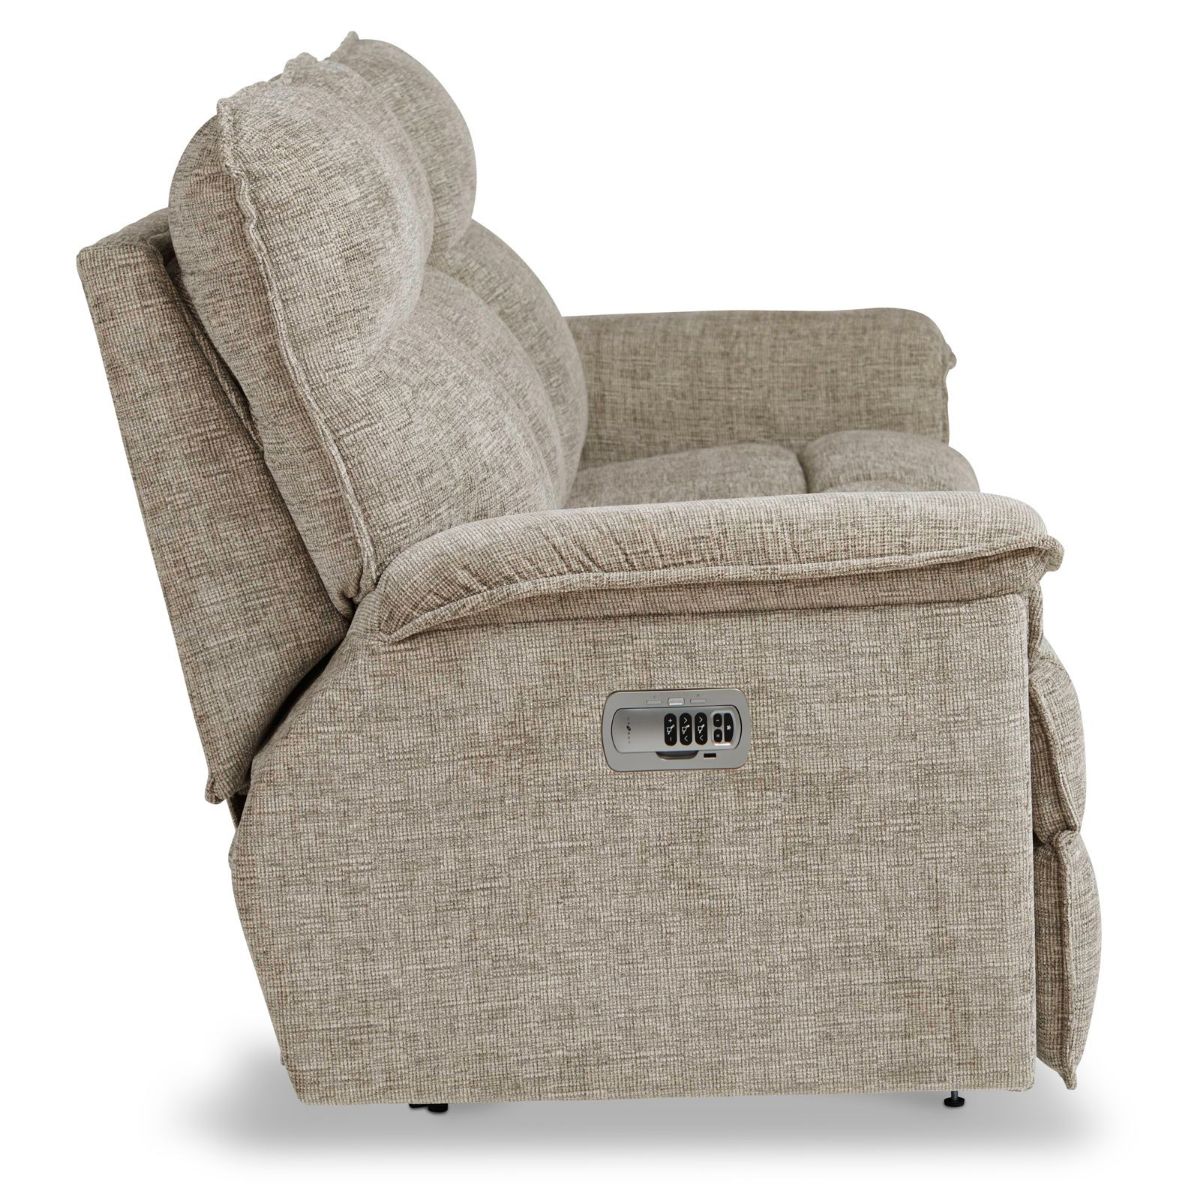 Picture of Jay Muslin Power Recliner Sofa